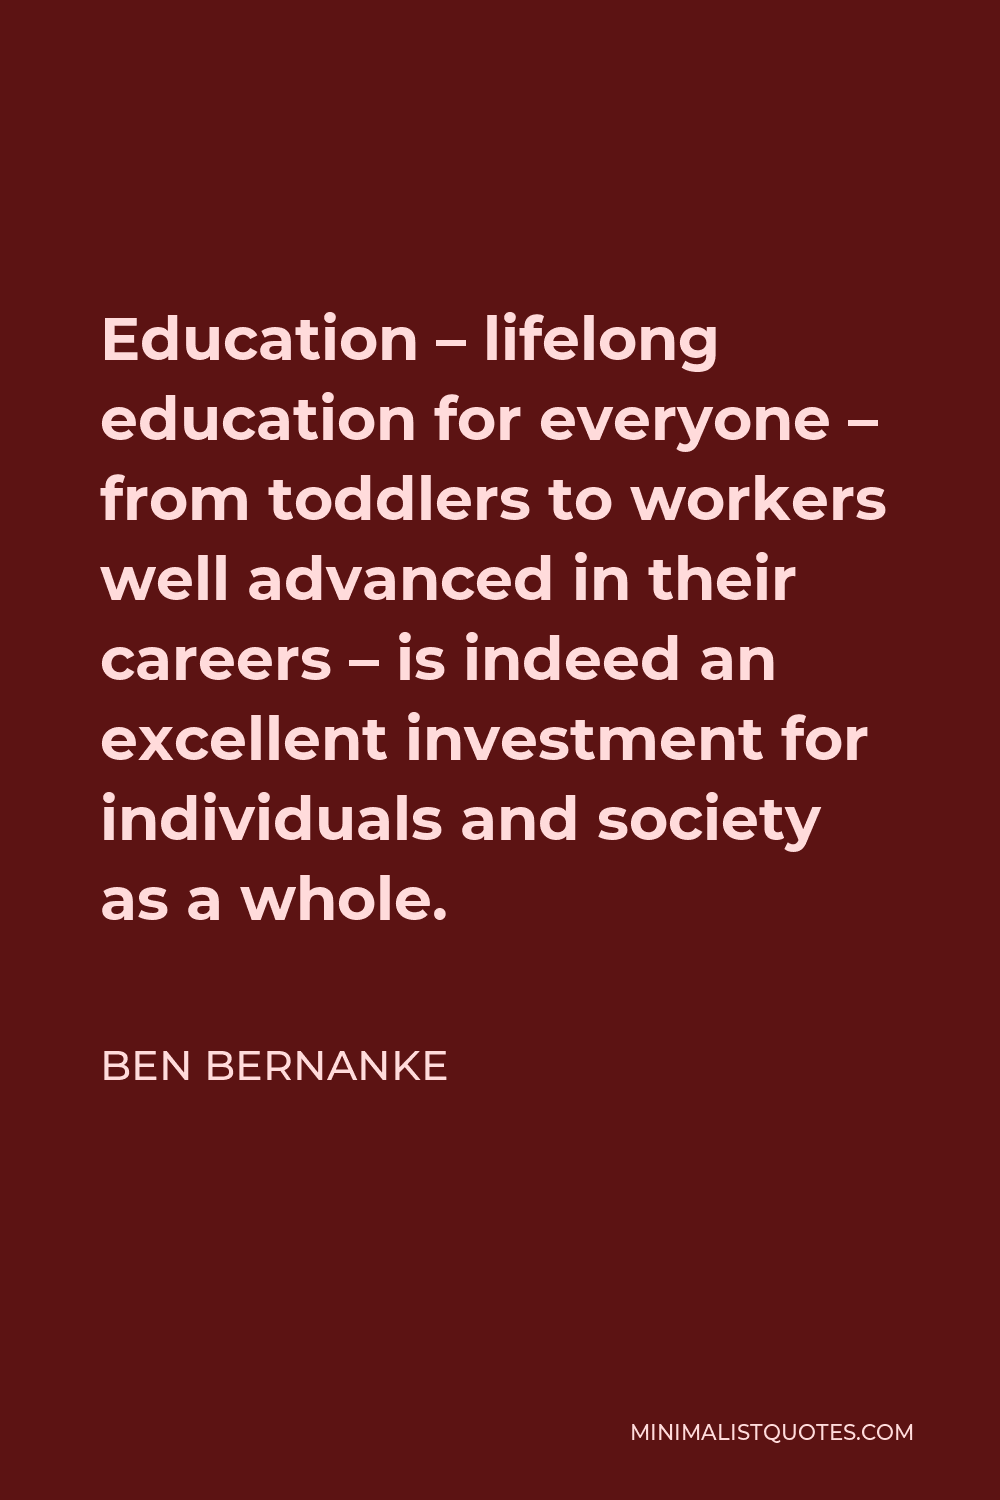 Ben Bernanke Quote - Education – lifelong education for everyone – from toddlers to workers well advanced in their careers – is indeed an excellent investment for individuals and society as a whole.